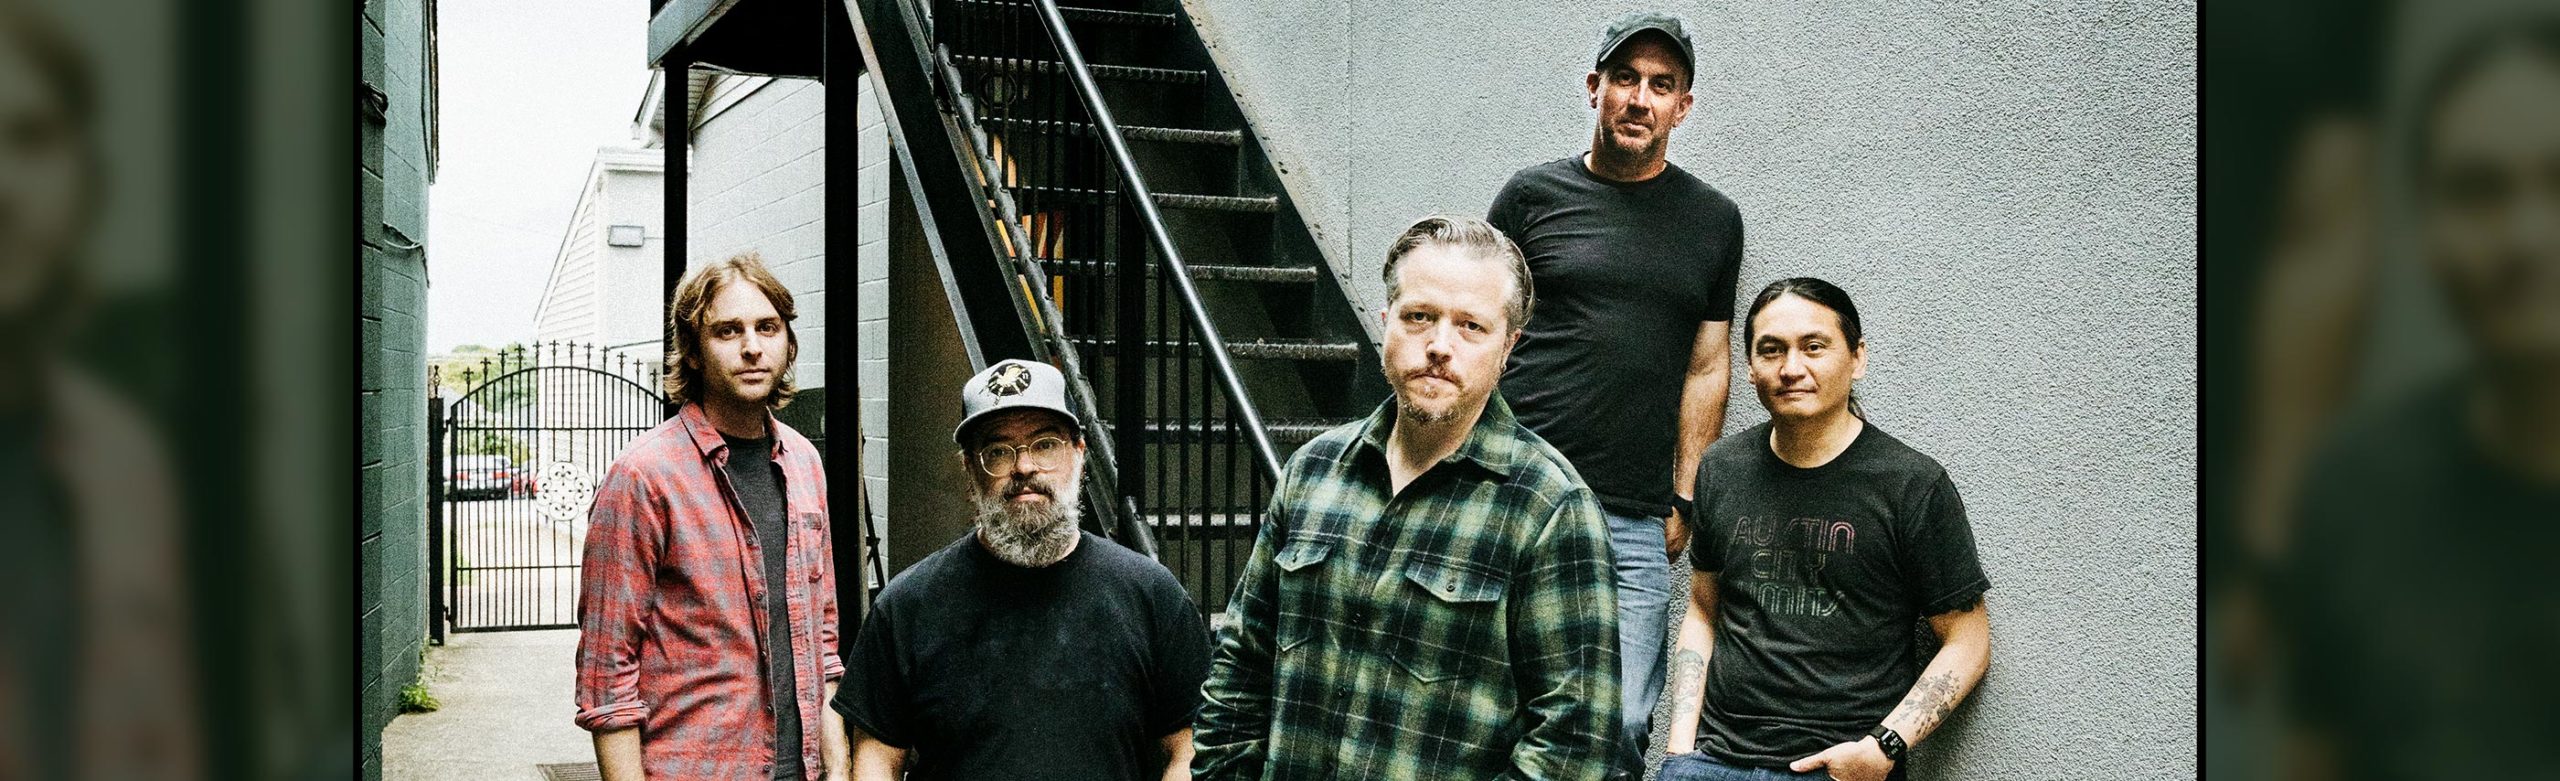 Jason Isbell and The 400 Unit Confirm Concert at The ELM Image